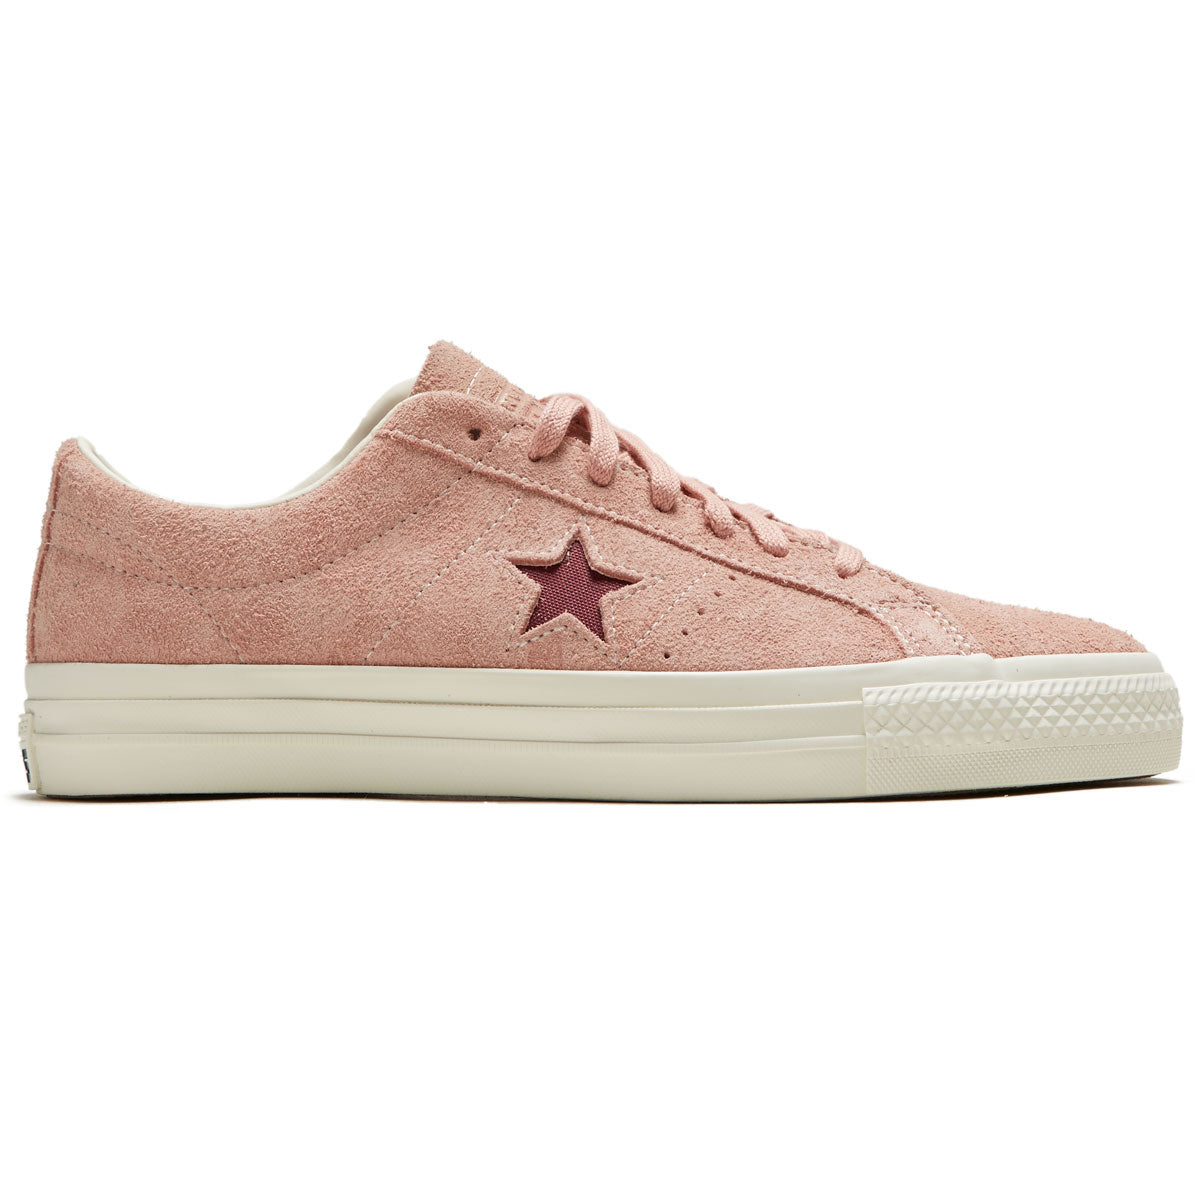 Converse One Star Shoes Canyon Dusk/Cherry CCS